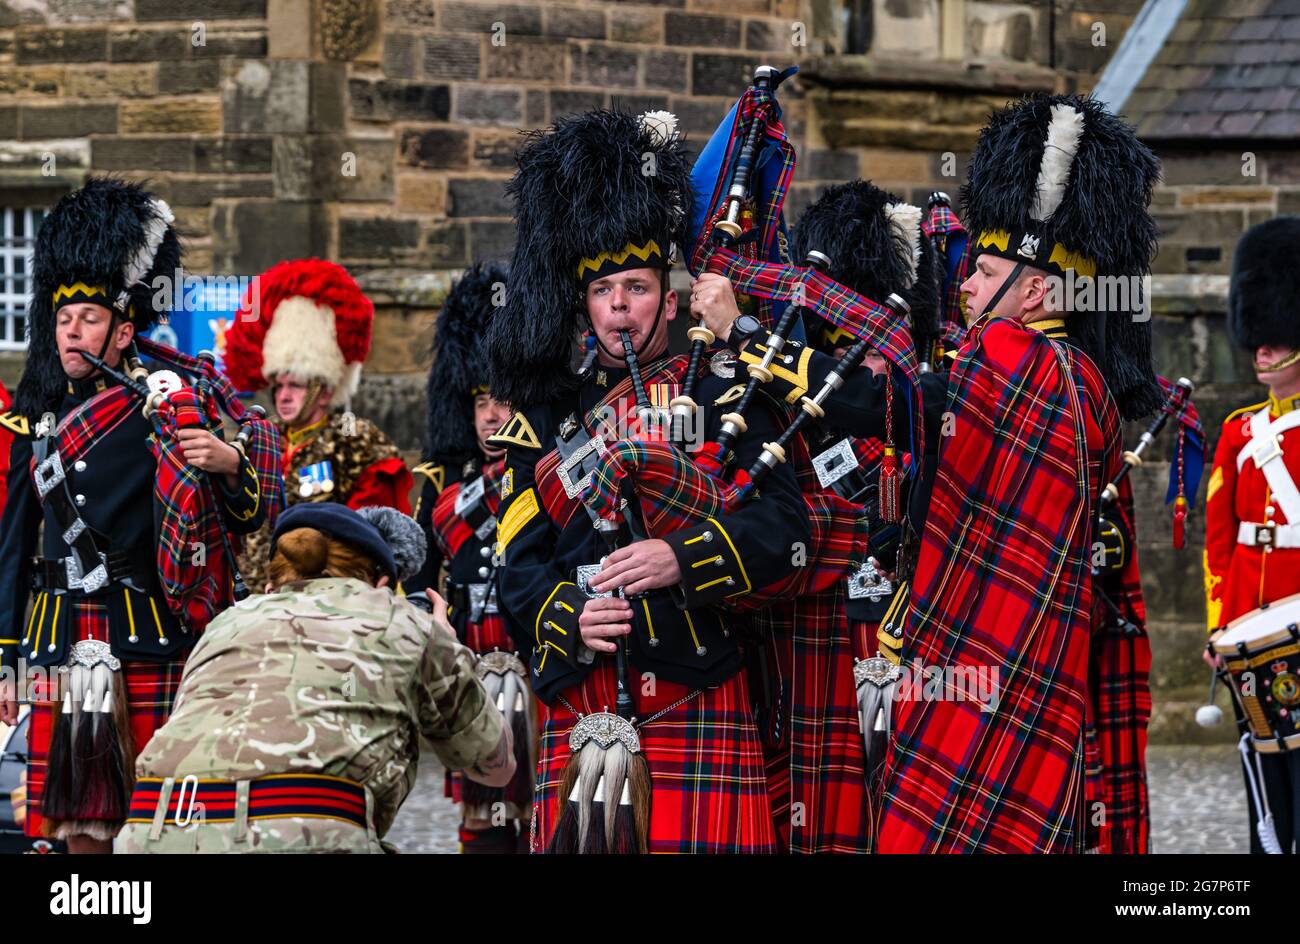 Royal Scots Dragoon Guards military bagpipe band wearing kilts tuning bagpipes at Edinburgh Castle in preparation for a ceremony, Scotland, UK Stock Photo